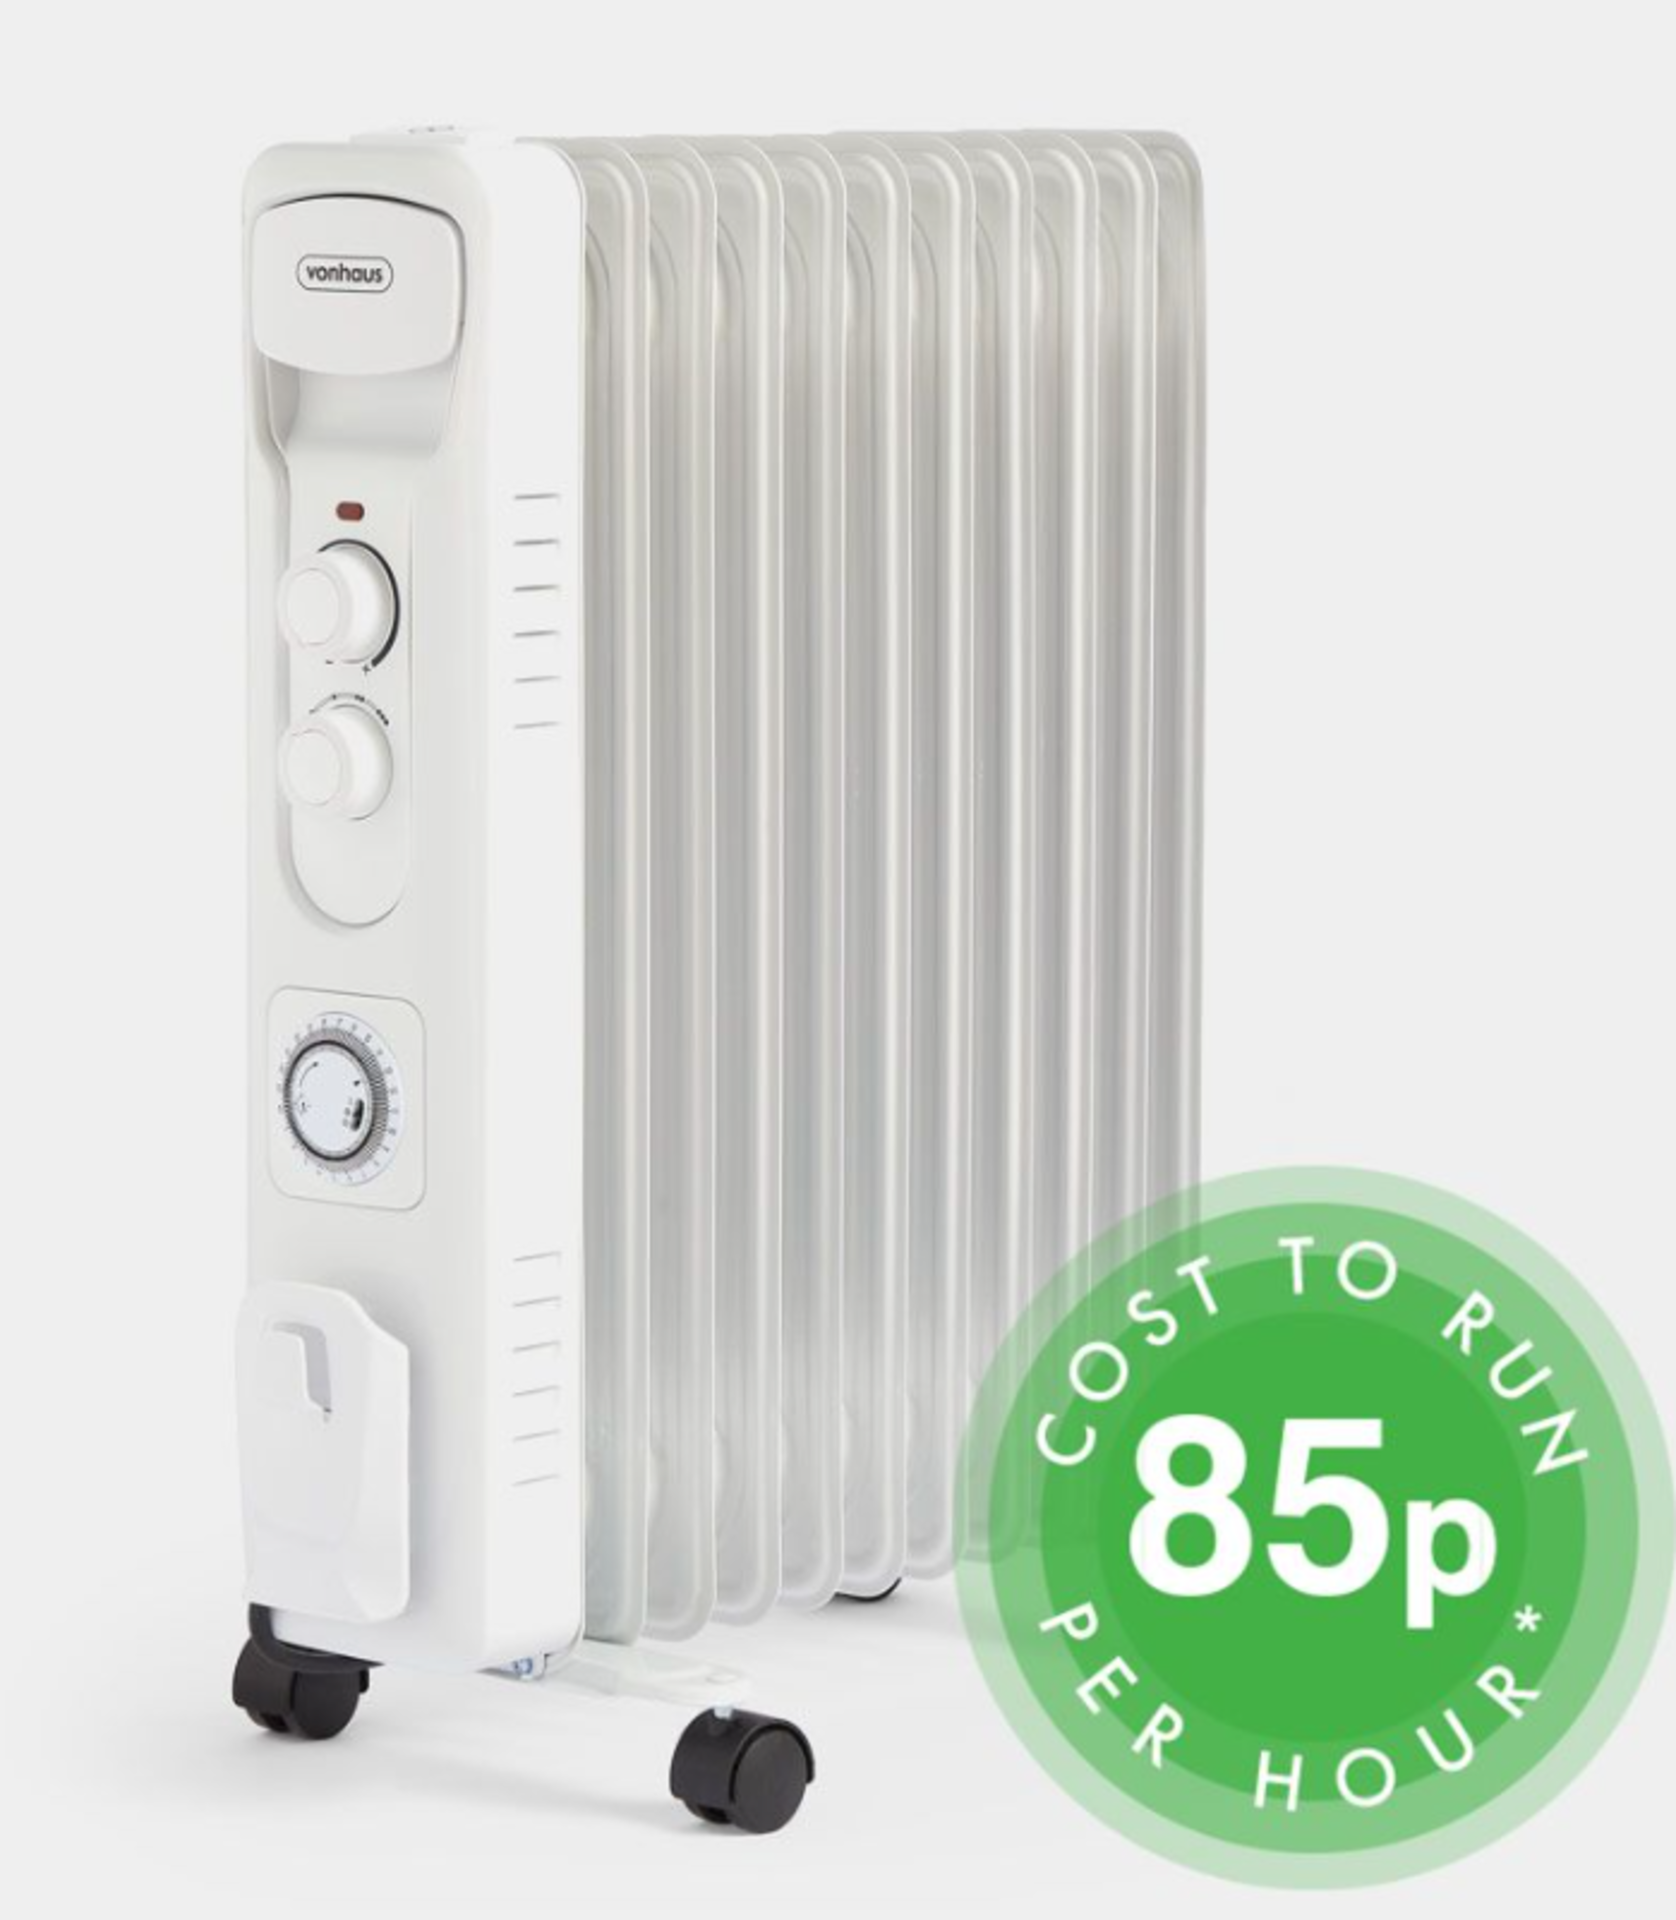 11 Fin 2500W Oil Filled Radiator - White. The high-performance luxury 2500W Oil Filled Radiator is a